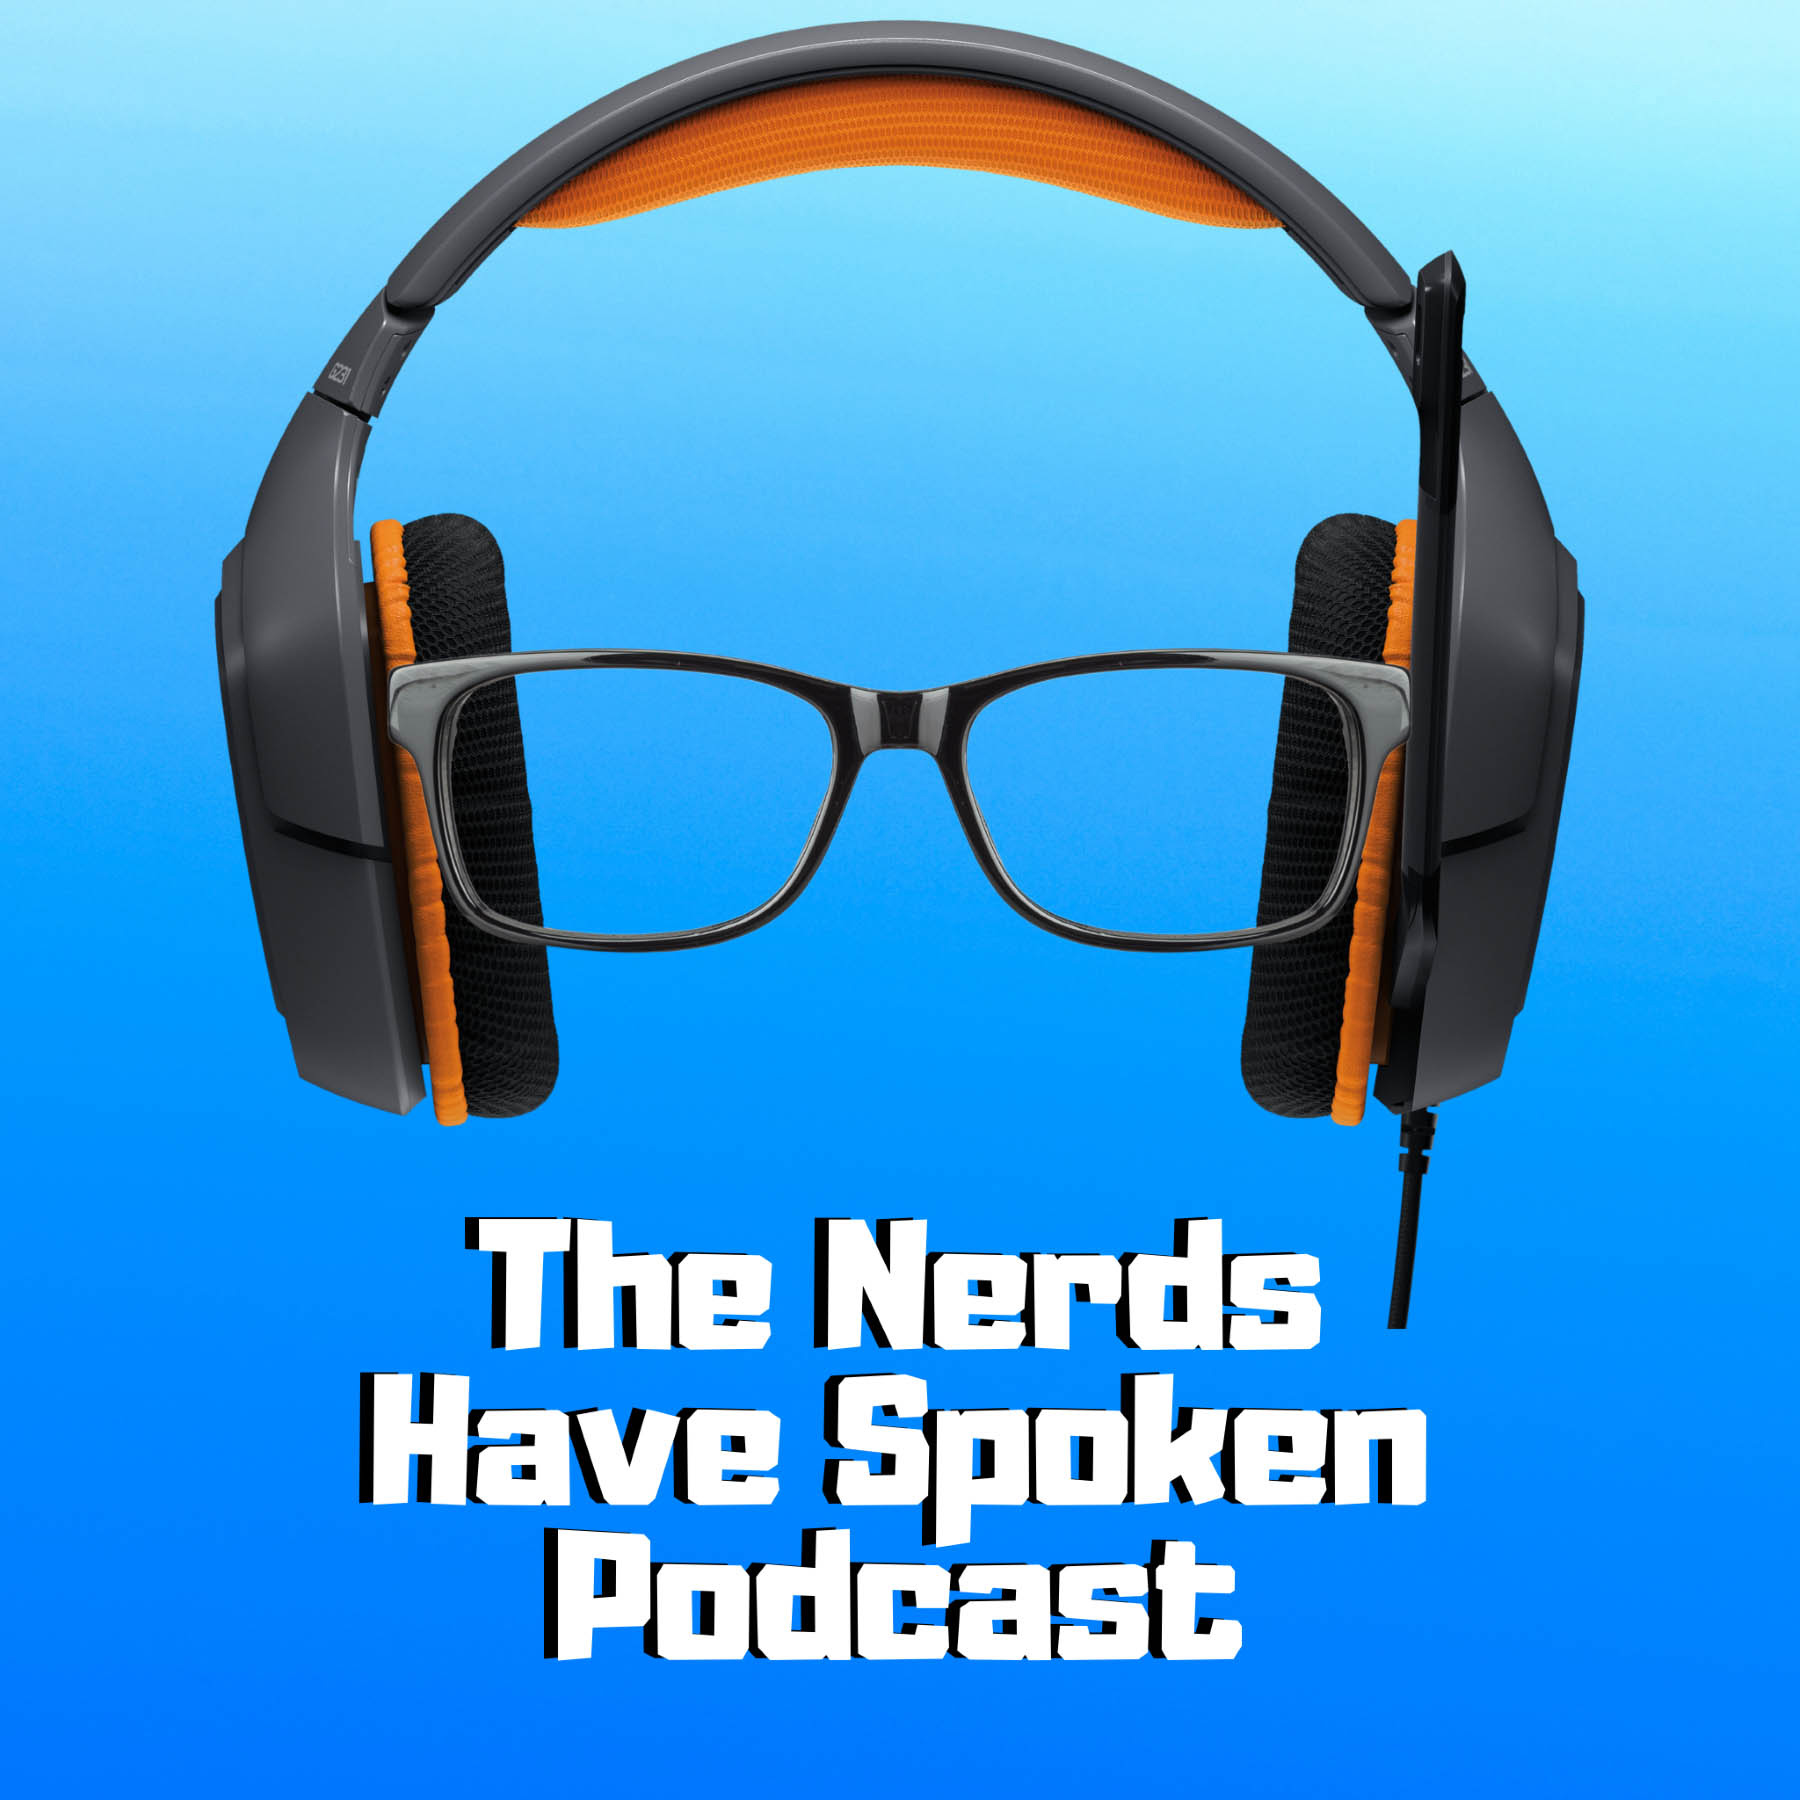 The Nerds Have Spoken Podcast